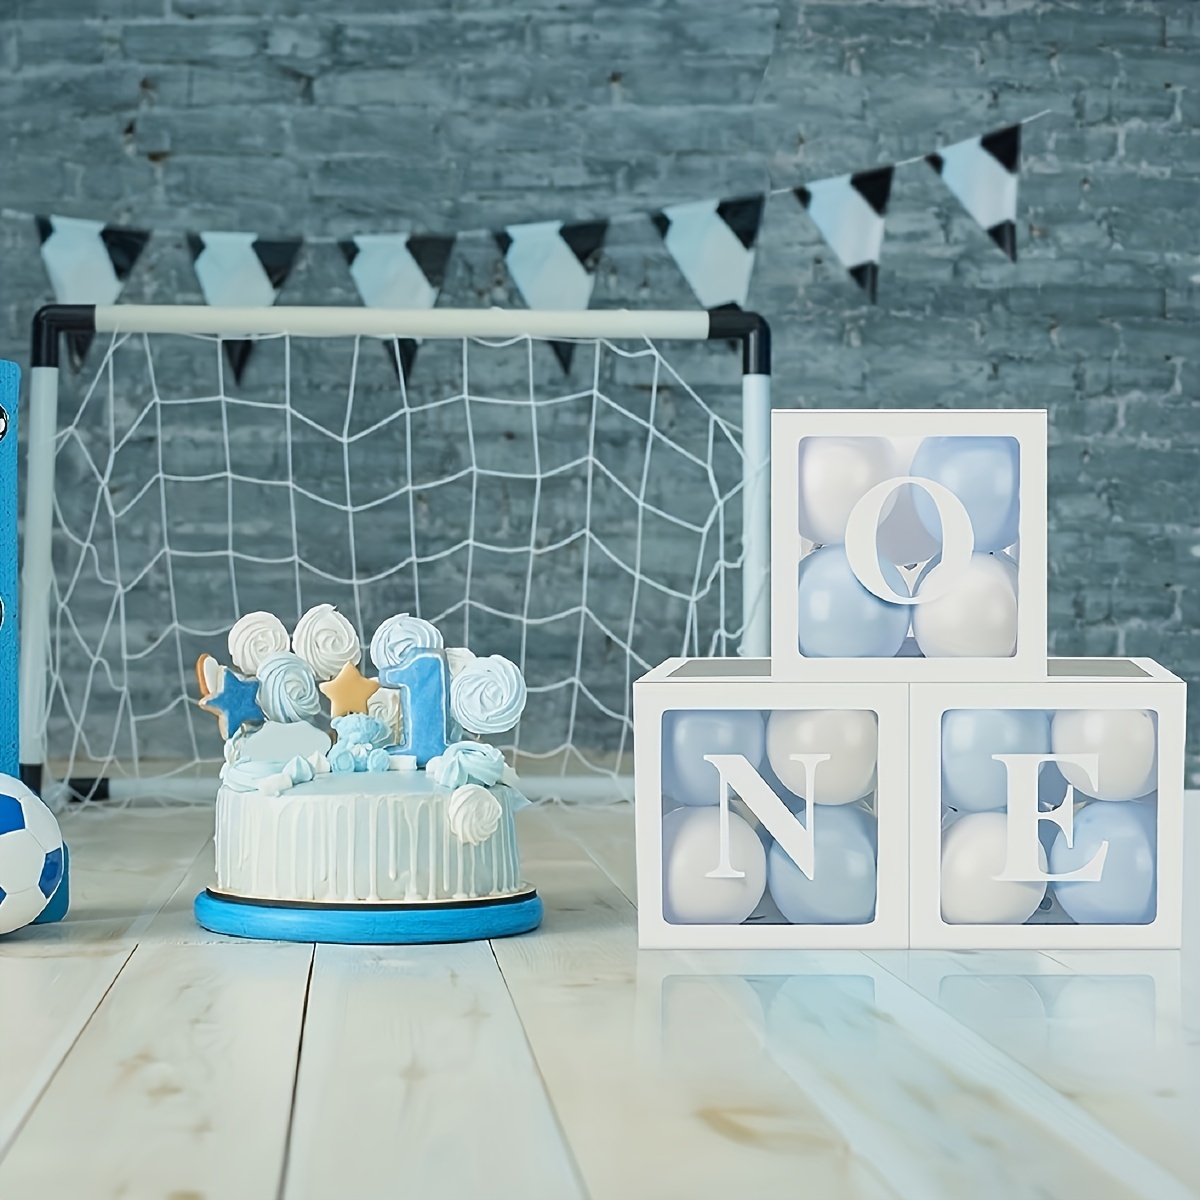 One Boxes for 1st Birthday WITH 24 Balloons for 1 Year Old Party - Baby  First Birthday Decorations Clear Cube Blocks 'ONE' Letters as Cake Smash